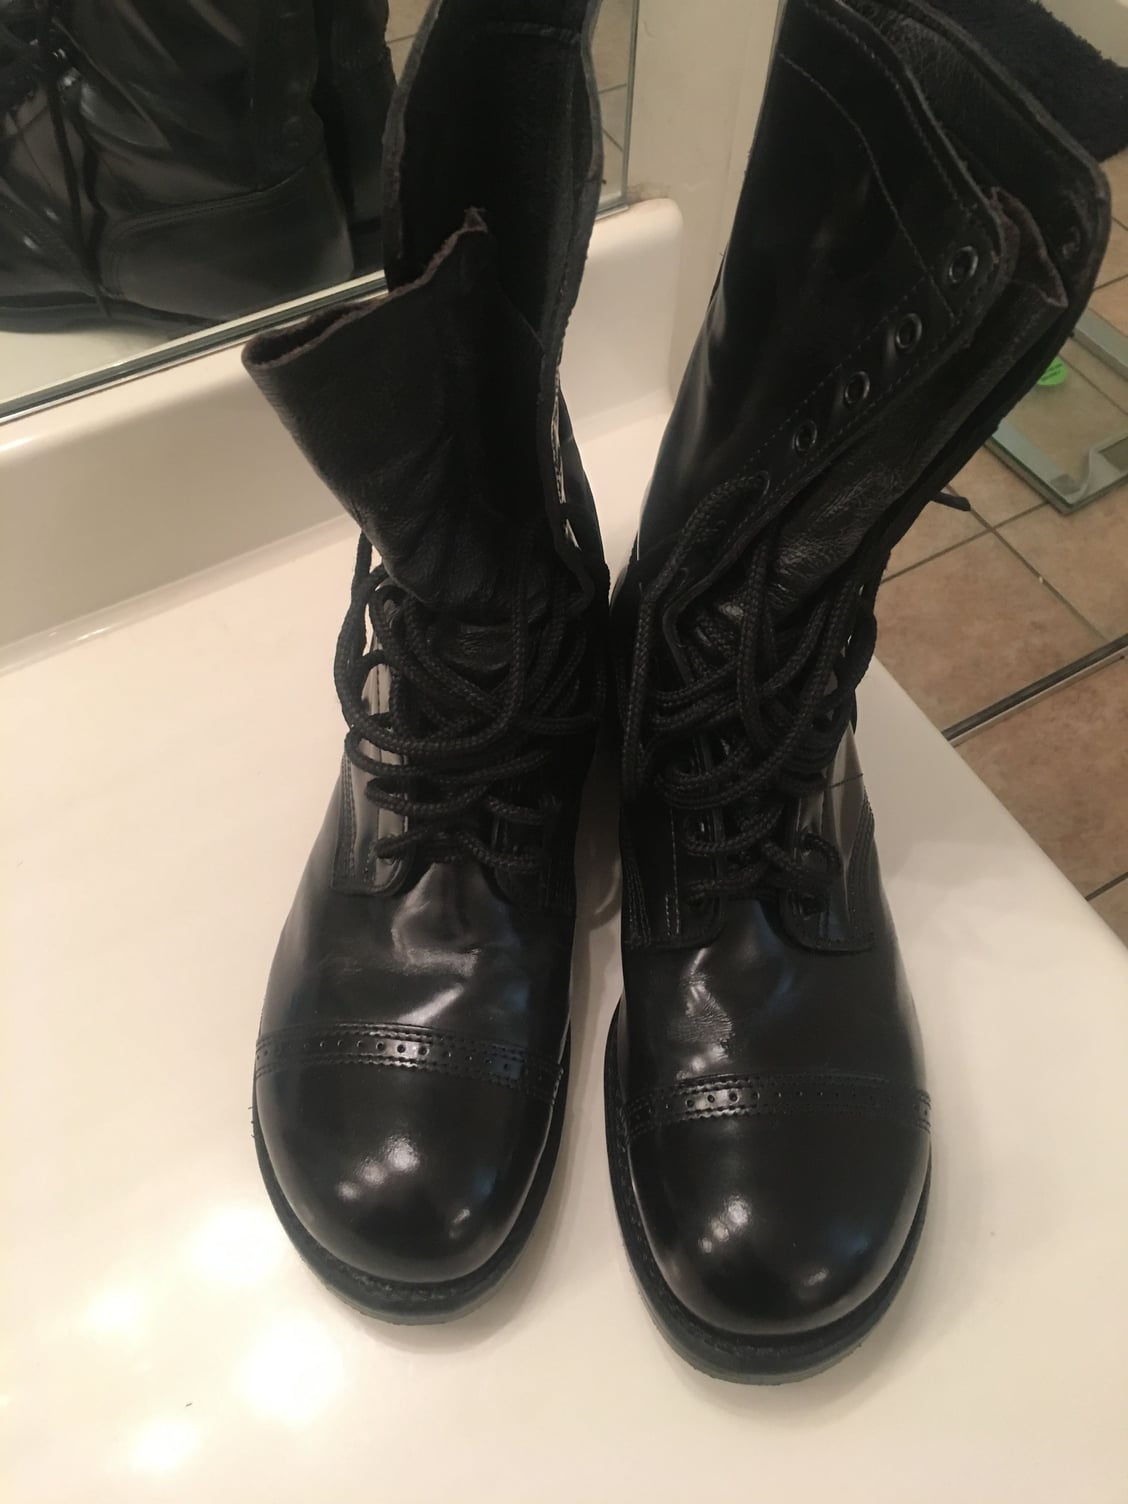 Corcoran Leather Military Jump Boots - Size 11.5 - Brand New - Nicely ...